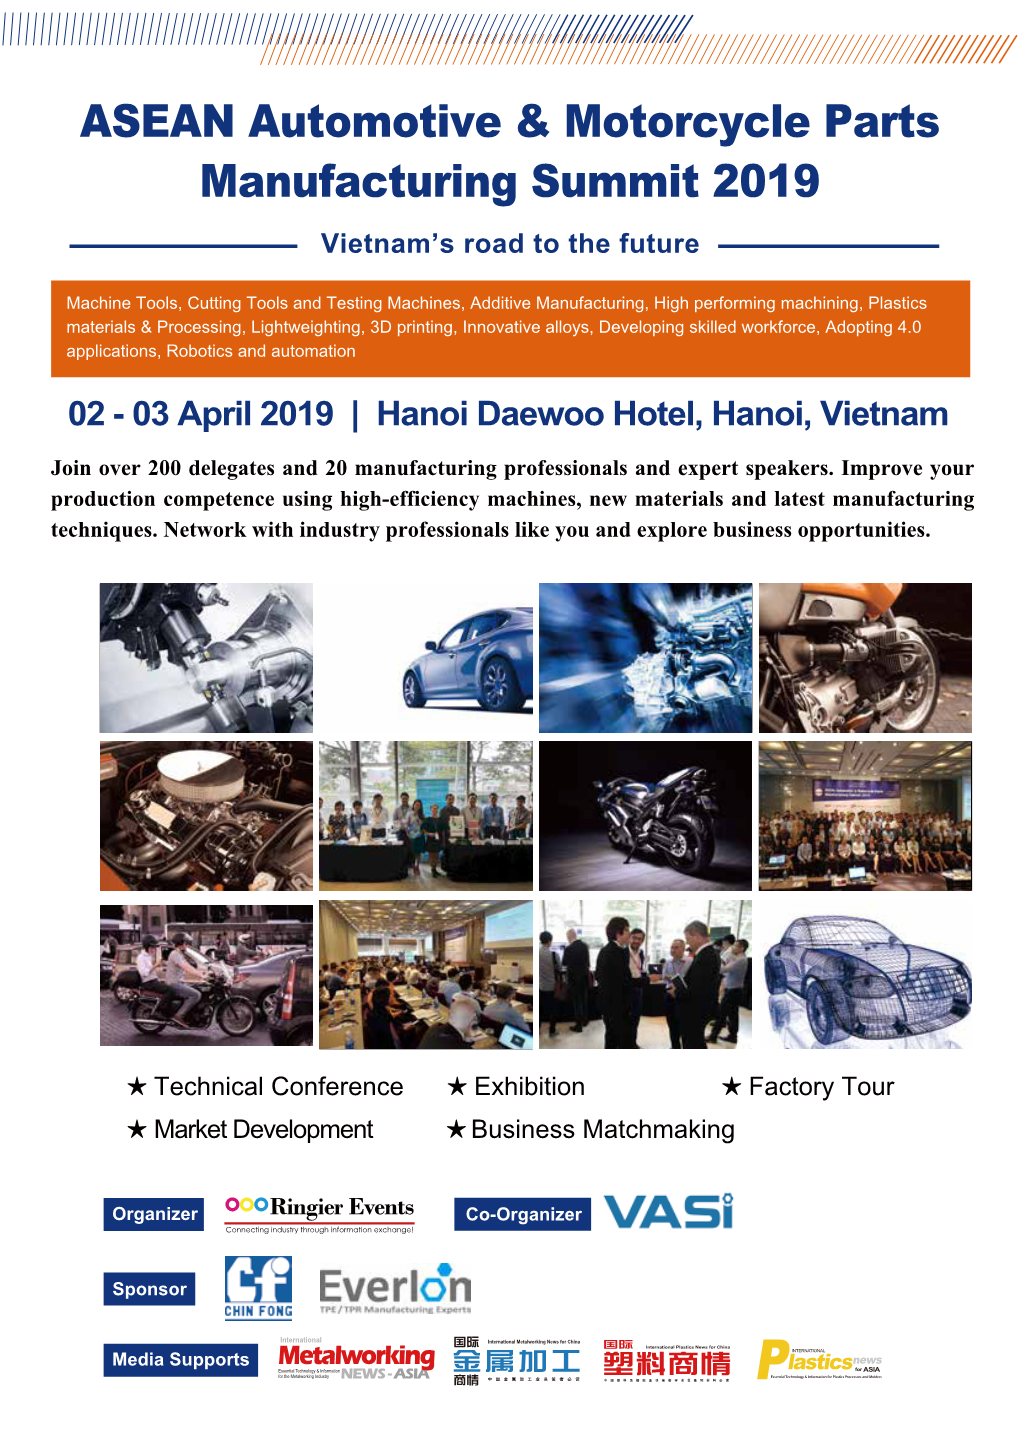 ASEAN Automotive & Motorcycle Parts Manufacturing Summit 2019